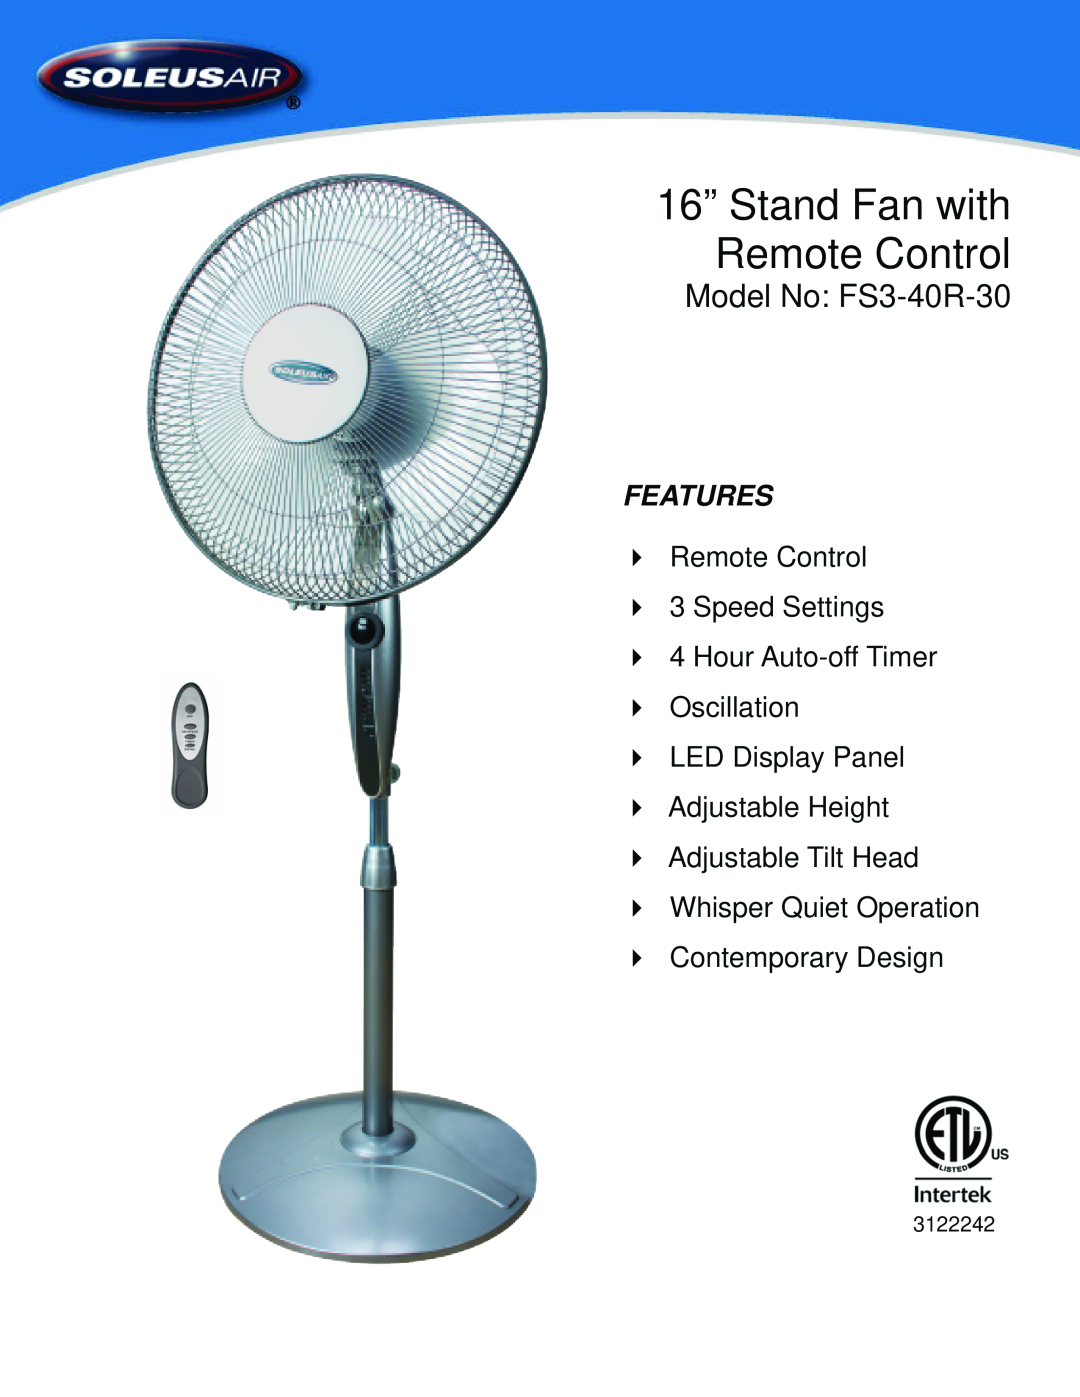 Soleus Air manual 16” Stand Fan with Remote Control, Model No FS3-40R-30, Features, Remote Control 3 Speed Settings 